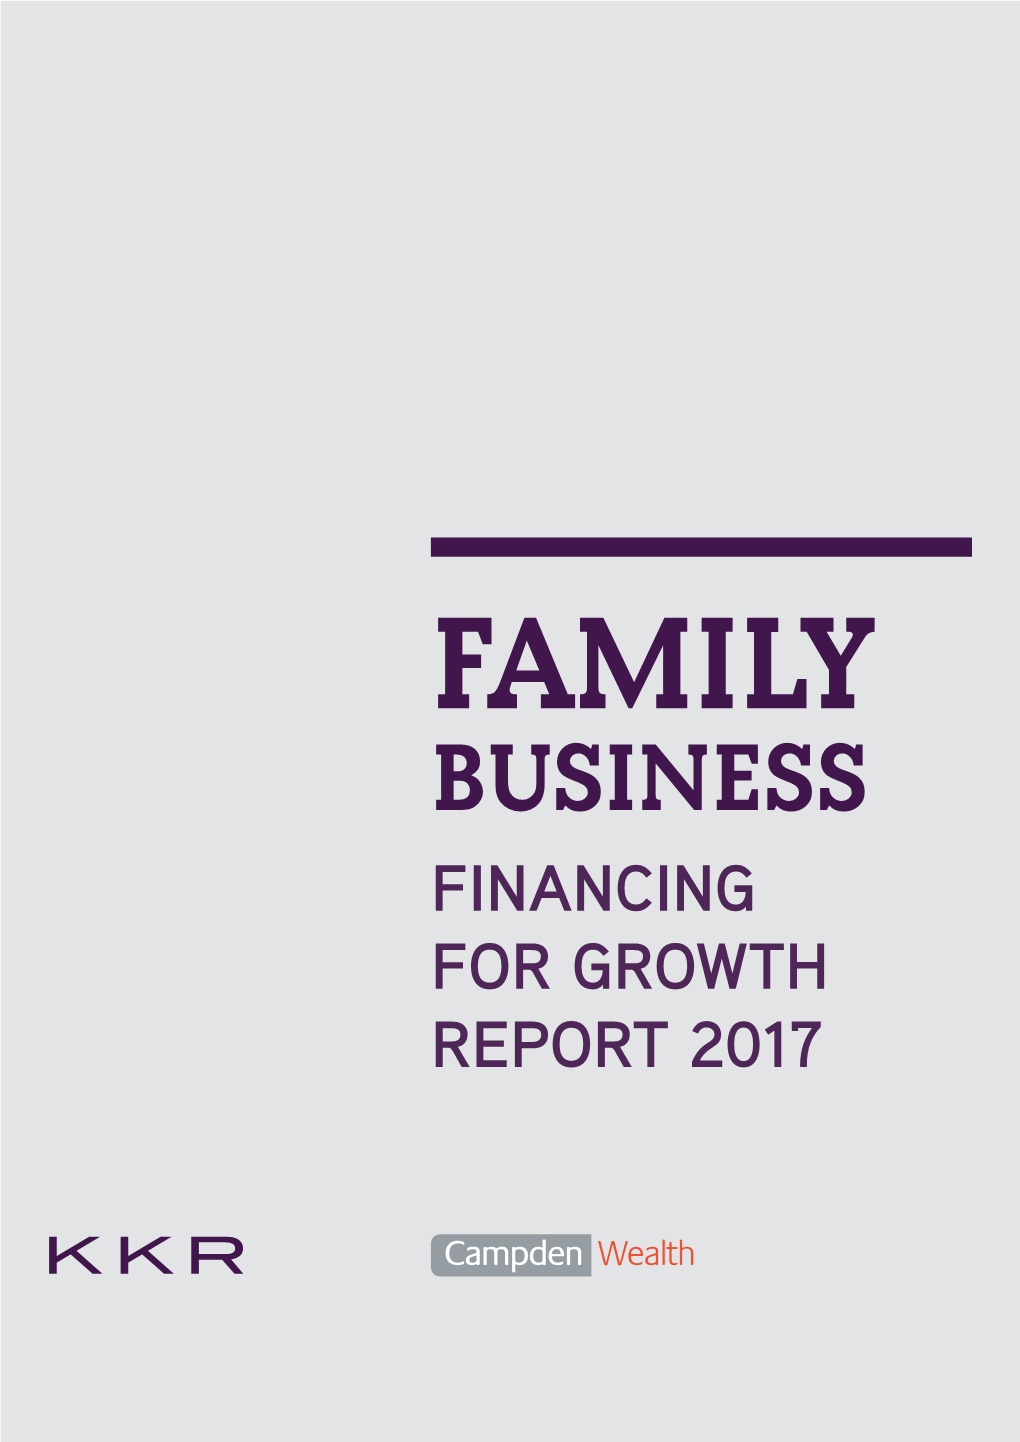 Family Business Financing for Growth 2017